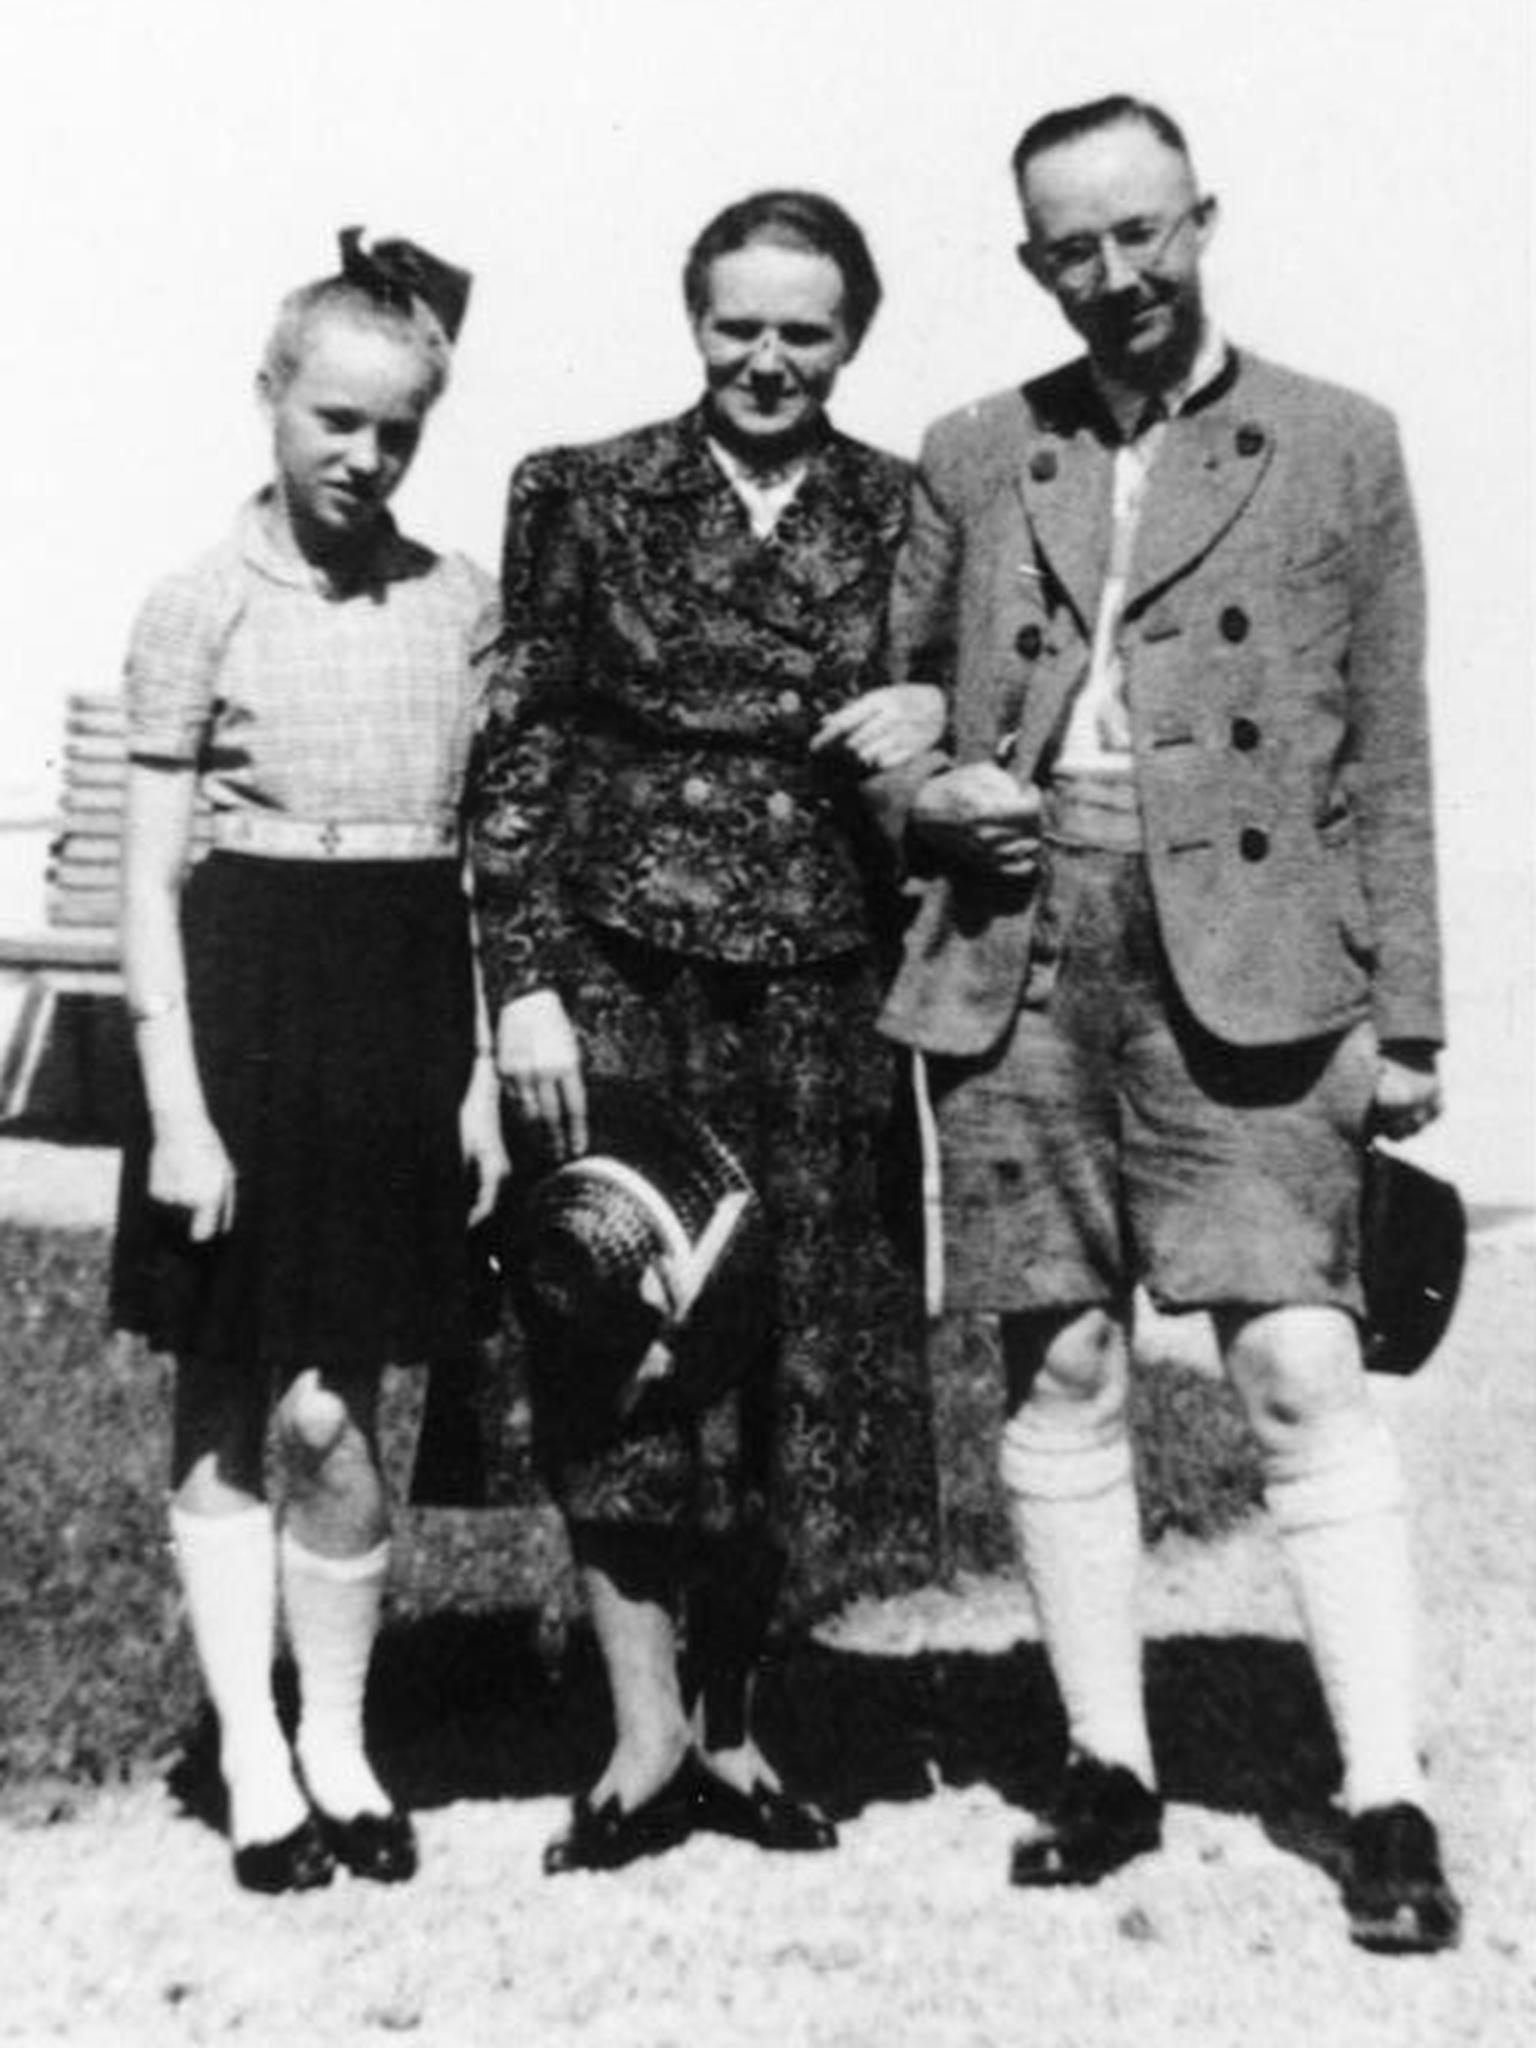 Burwitz with her mother and her father, the chicken farmer-turned-SS-chief, Heinrich Himmler (Bundesarchiv)